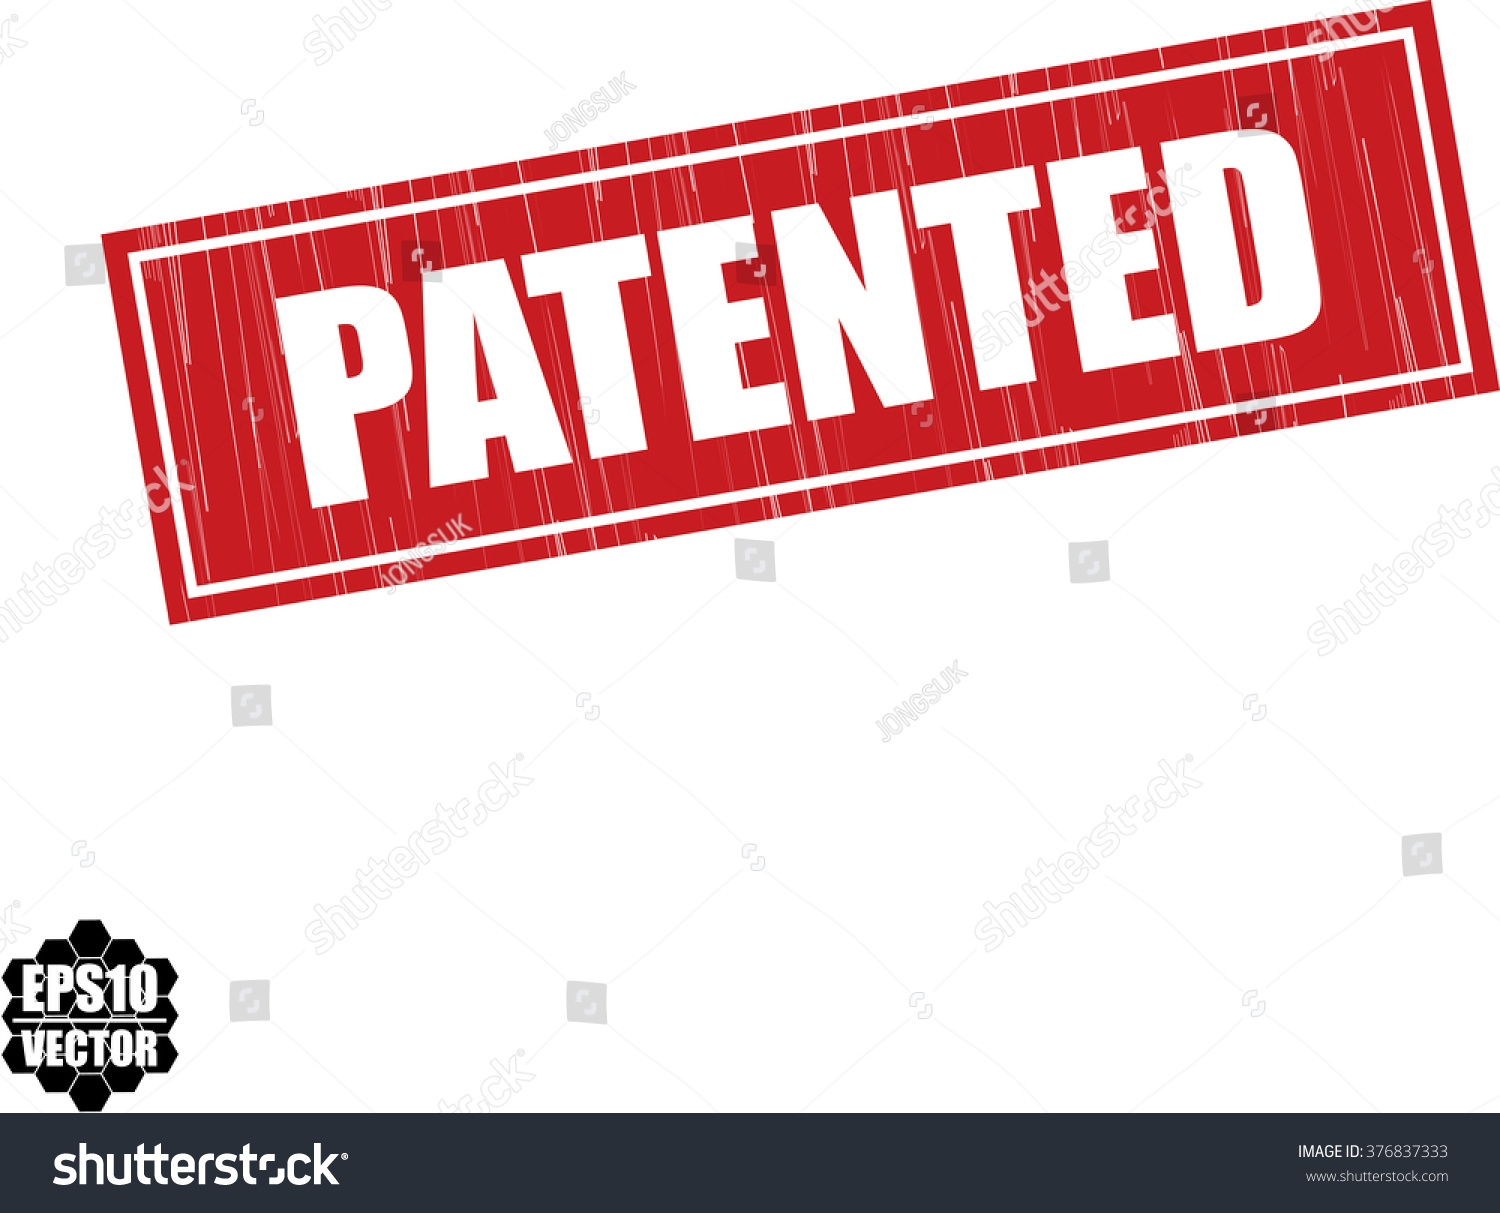 Patented Grunge Rubber Stamp Vector Illustration Stock Vector Royalty Free 376837333 5759